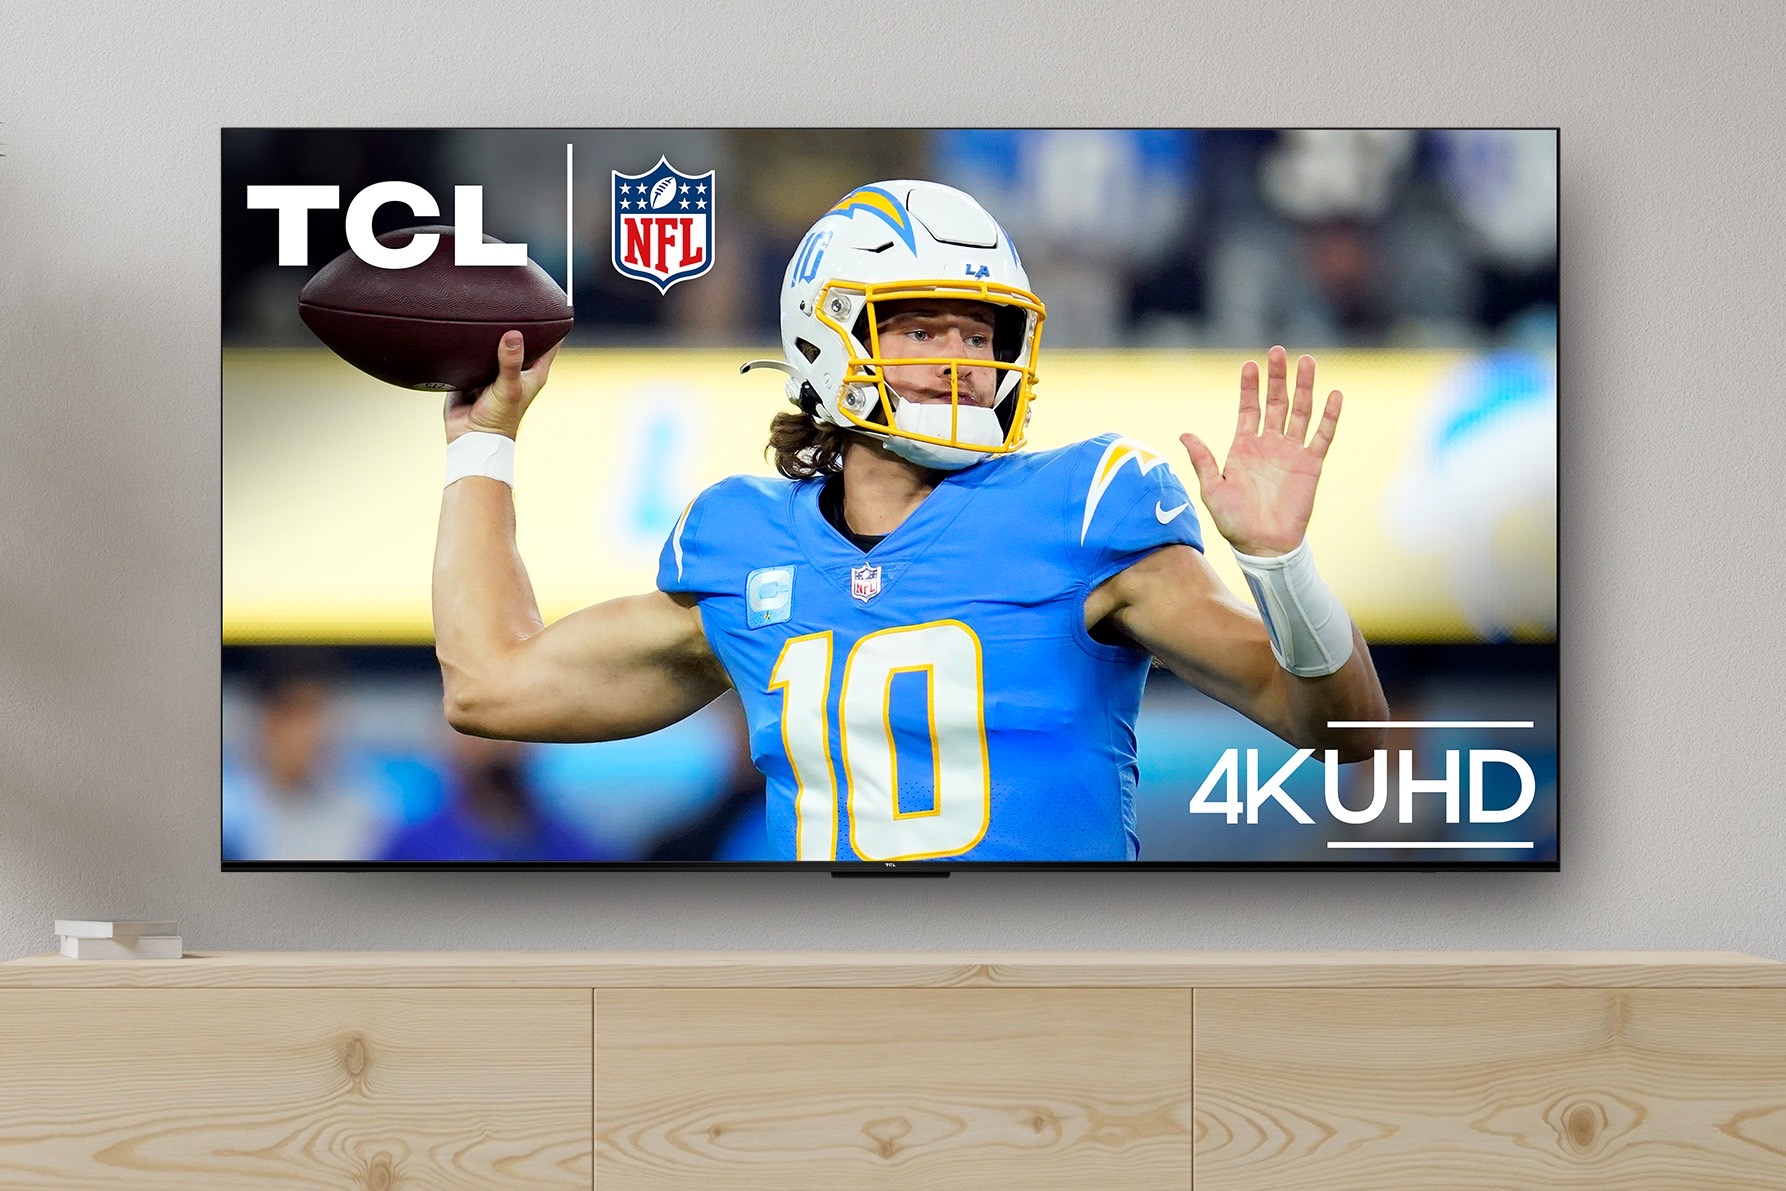 Start the new NBA season with a new TV Save $400 on a 4K TV Digital Trends